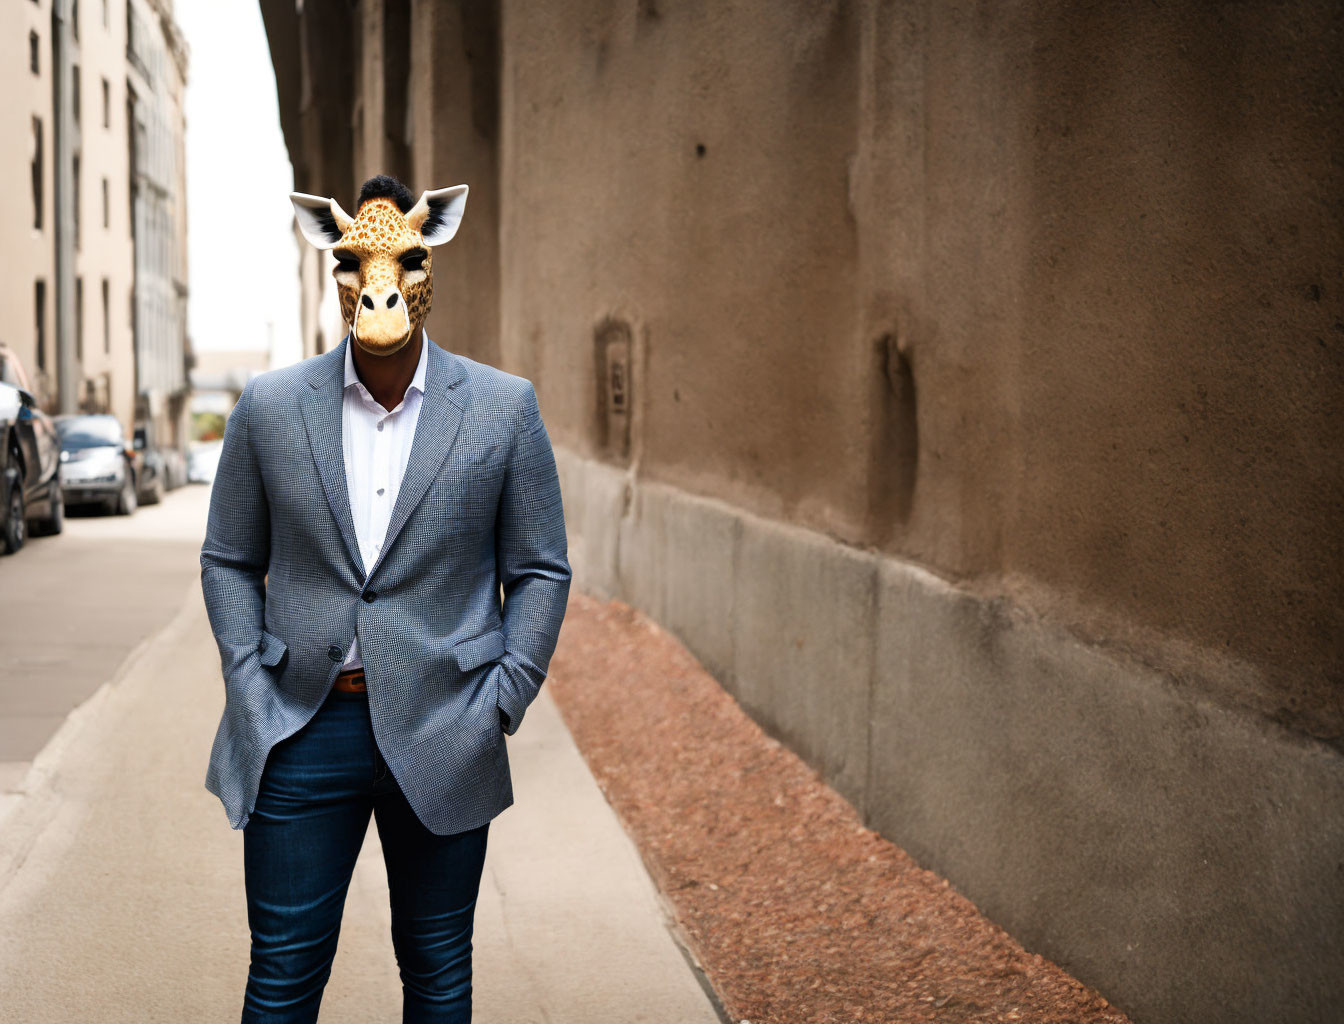 Person in sharp suit and jeans with giraffe mask on urban street.